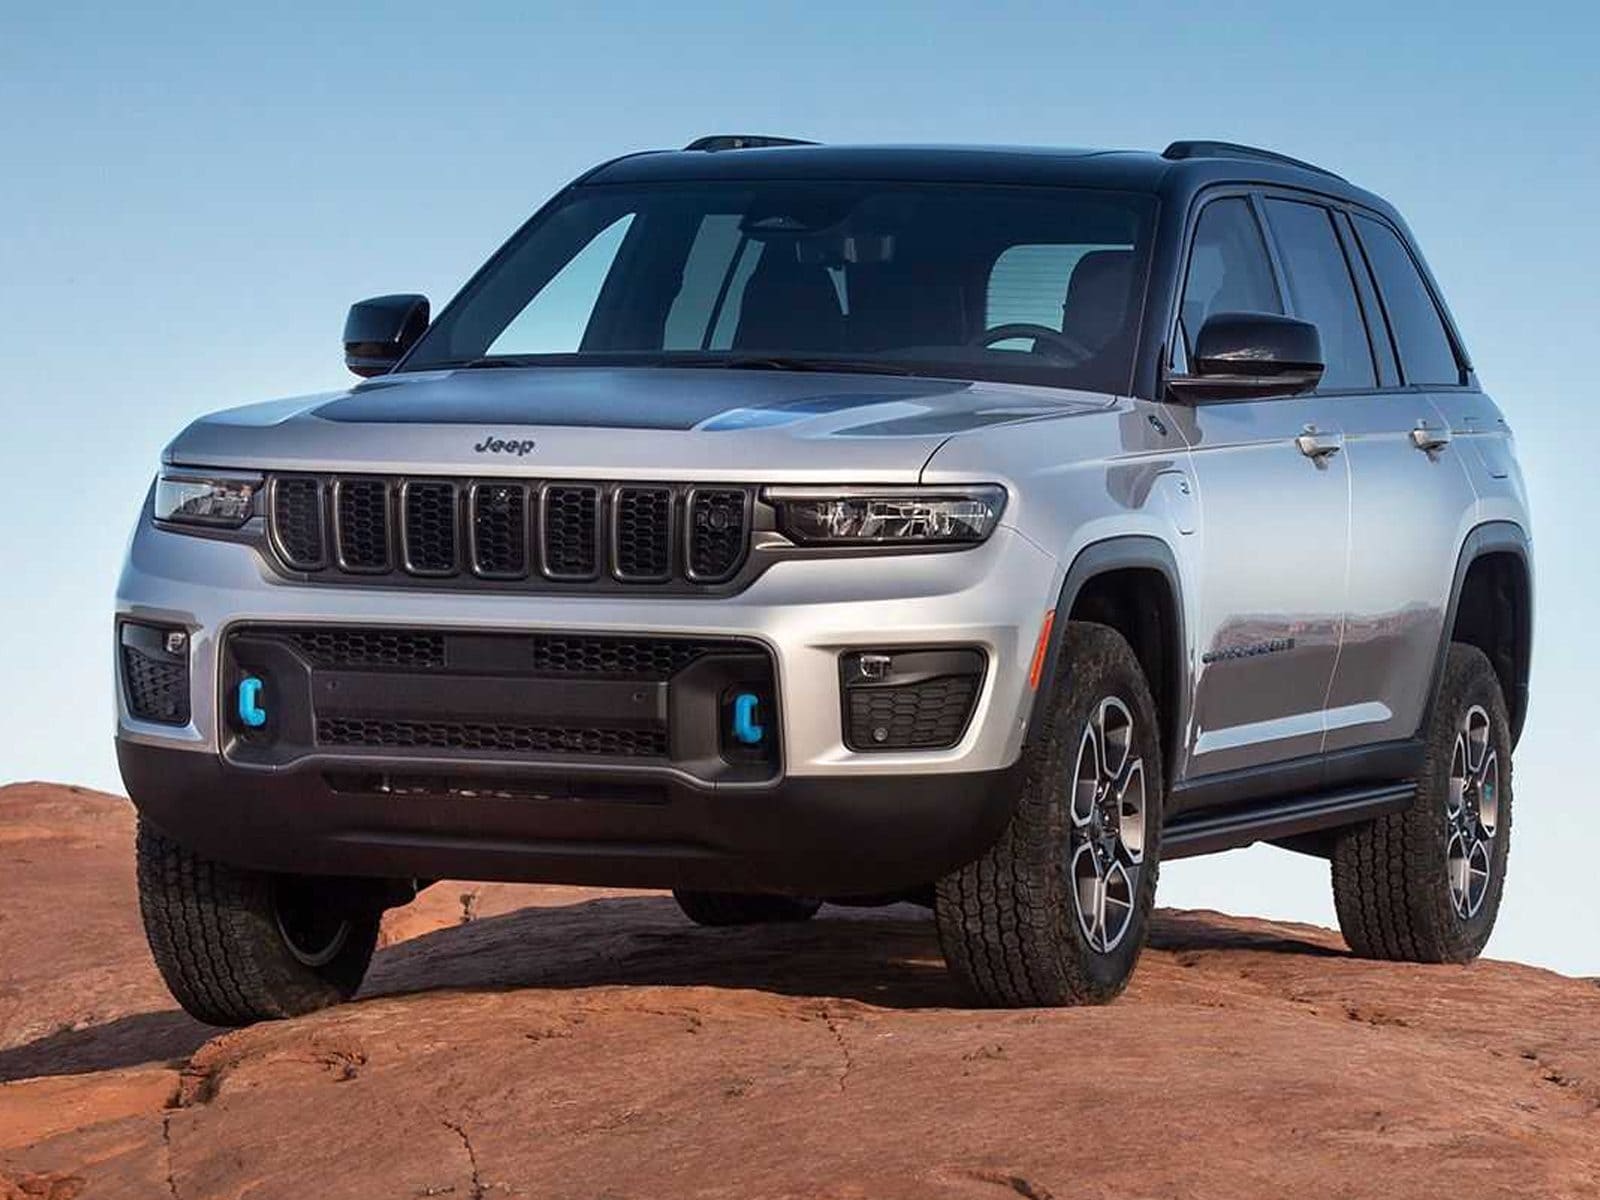 2022 Jeep Compass Trailhawk India launch in March - India Today